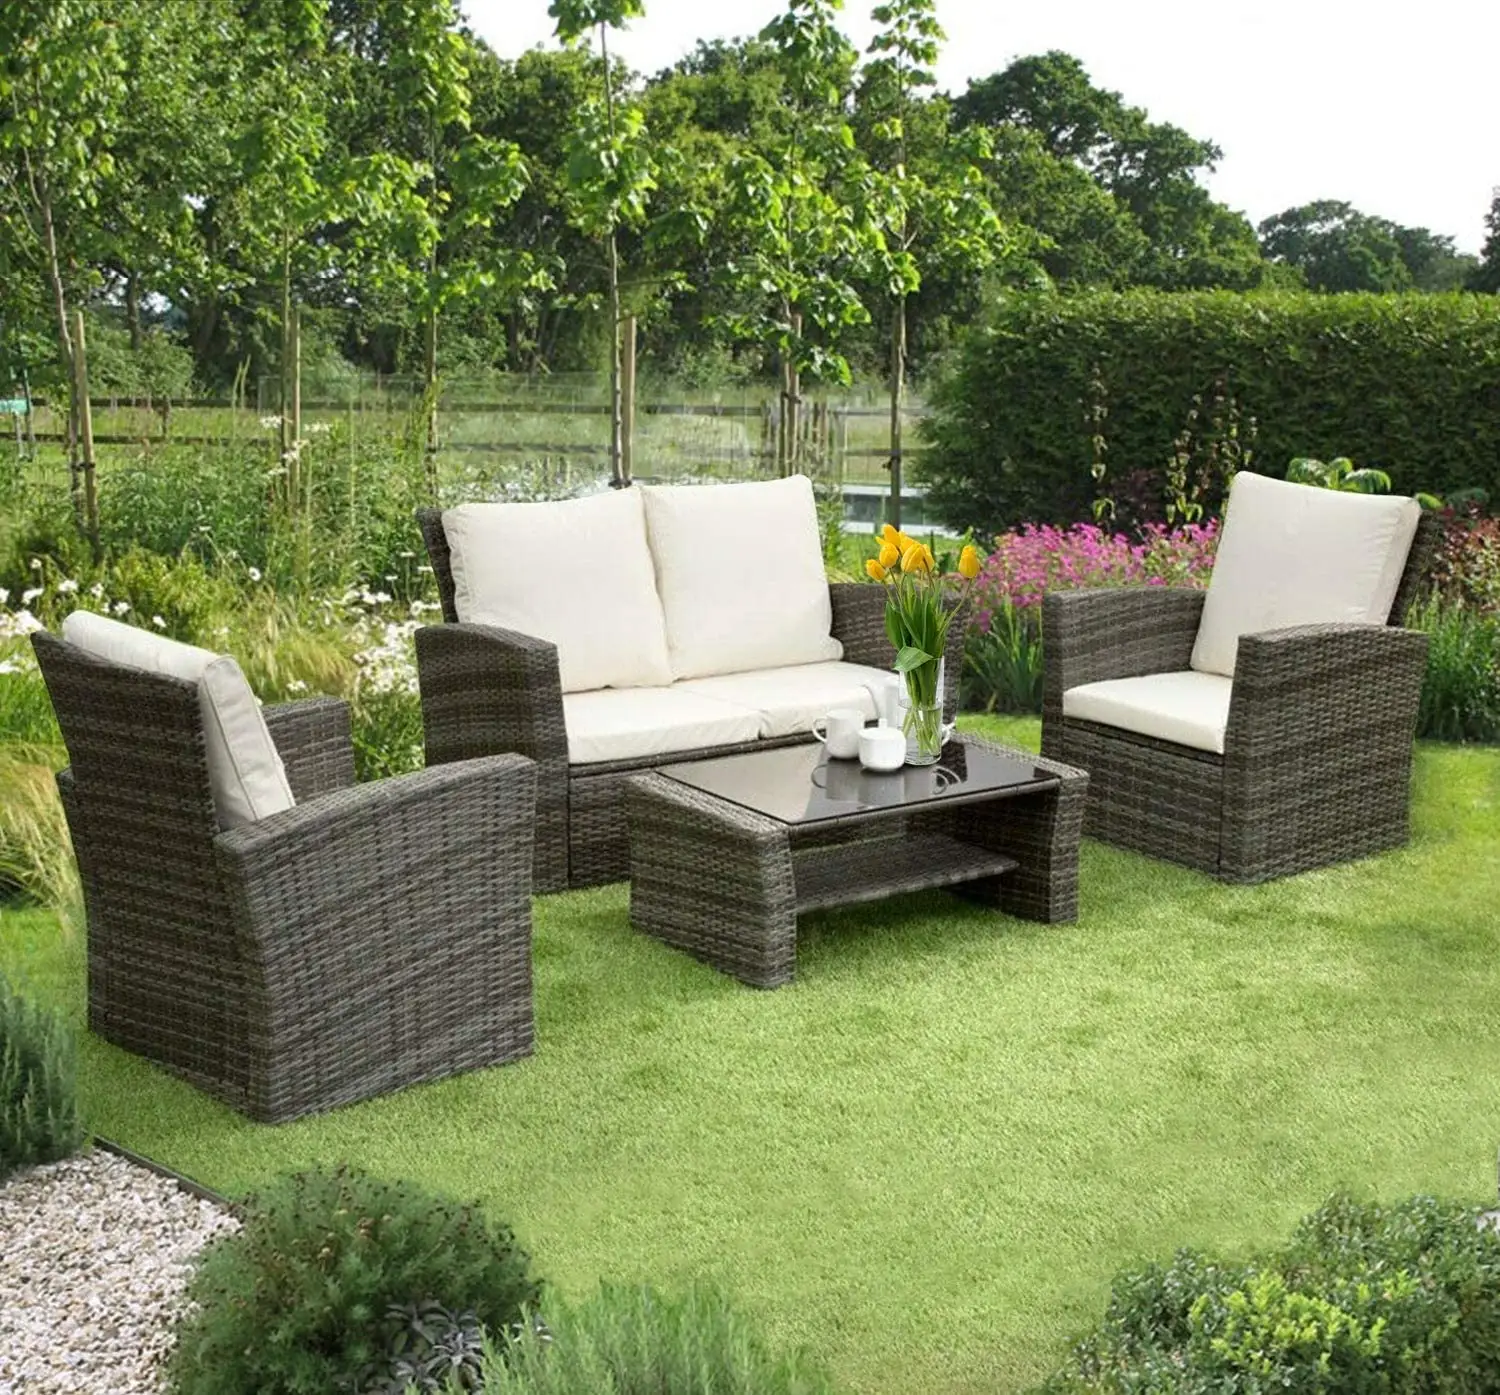 Rattan Outdoor Garden Patio/Conservatory 4 Seater Sofa And Armchair Set With Cushions And Coffee Table